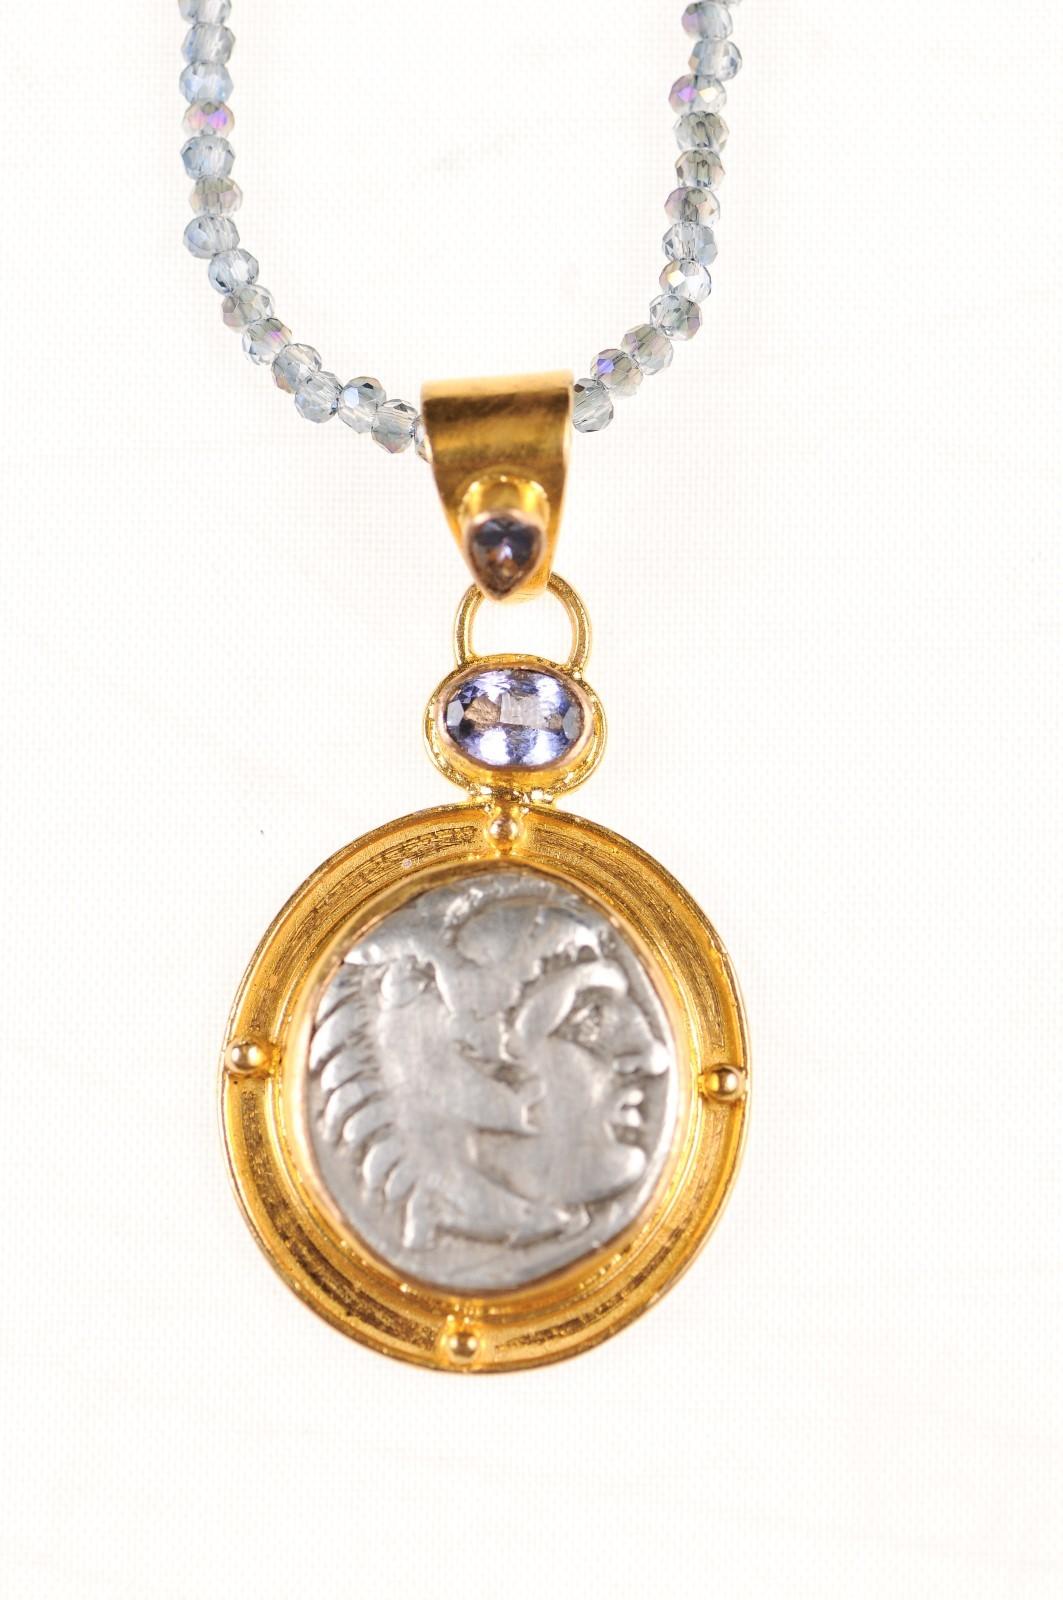 An Authentic Greek (Macedonian) Alexander the Great silver Drachm coin (circa 336 - 323 BC) set in a 22k gold bezel and bail adorned with tanzanite stones. The obverse, or front, side of this coin features Heracles. On the reverse side, Zeus seated